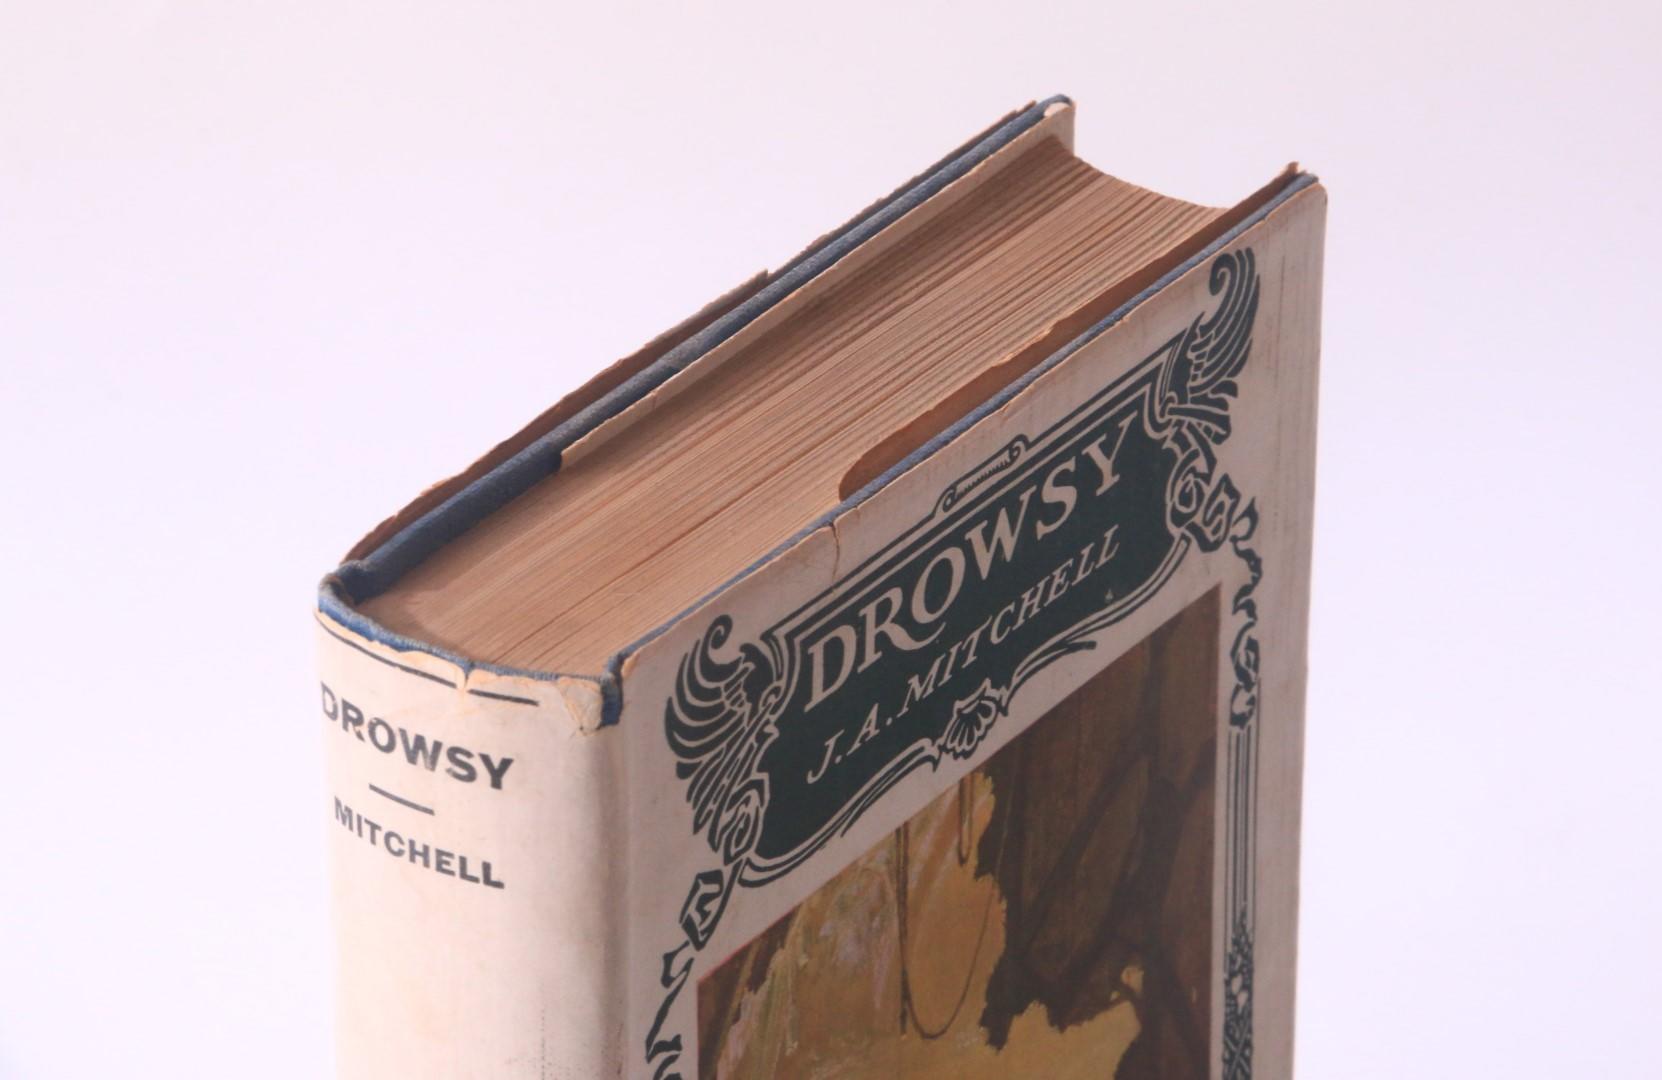 John Ames Mitchell - Drowsy - Frederick Stokes, 1917, First Edition.